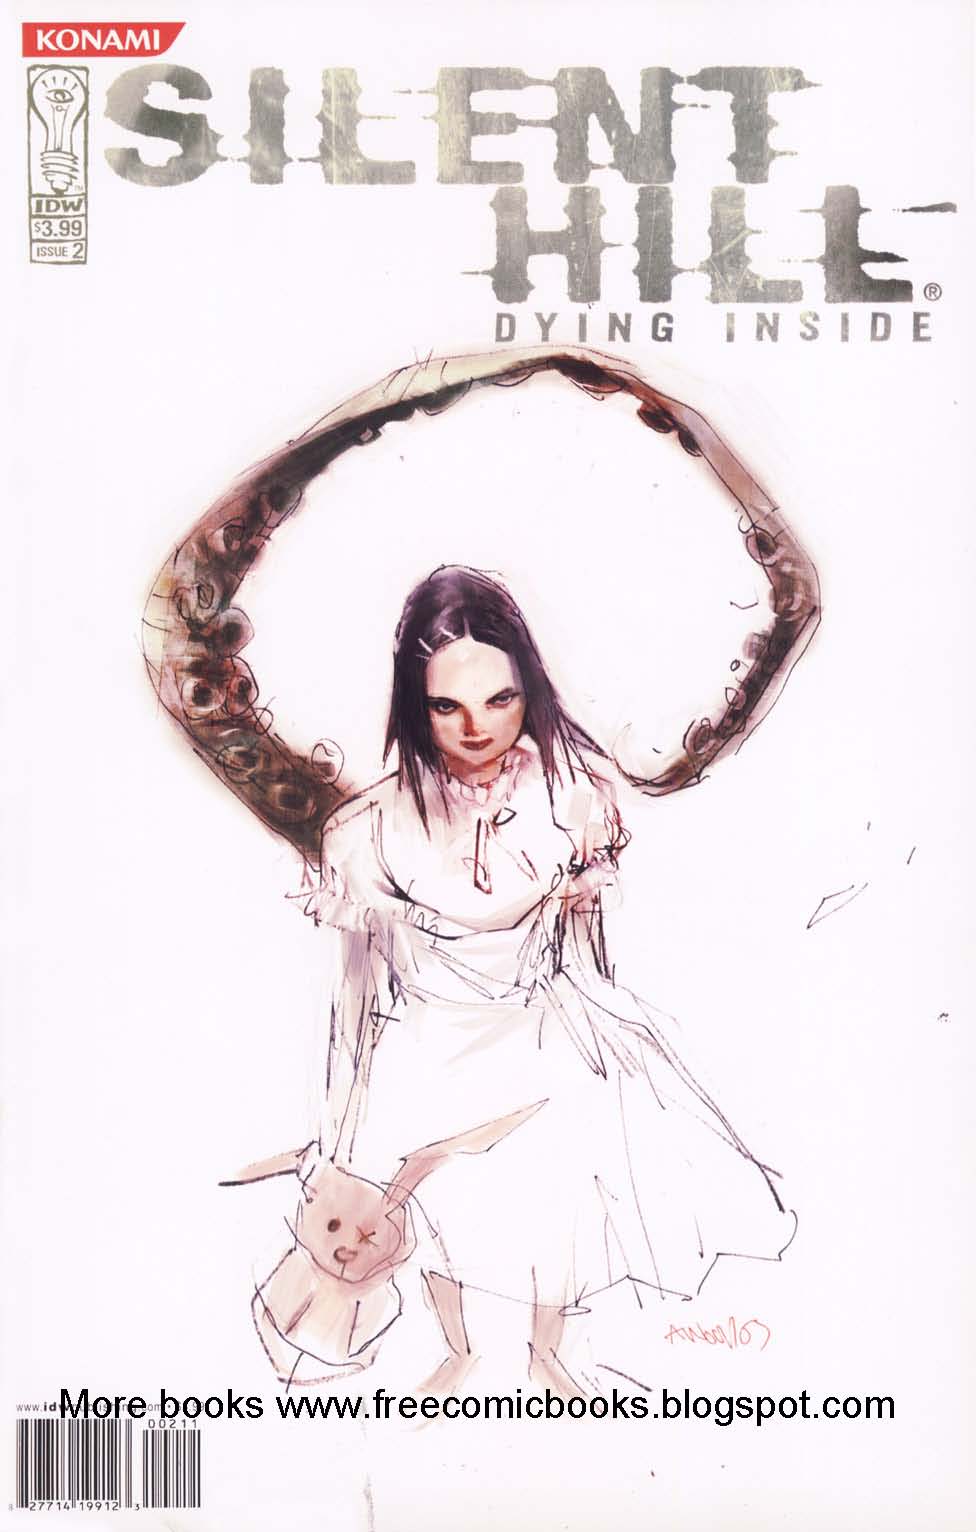 Read online Silent Hill: Dying Inside comic -  Issue #2 - 1